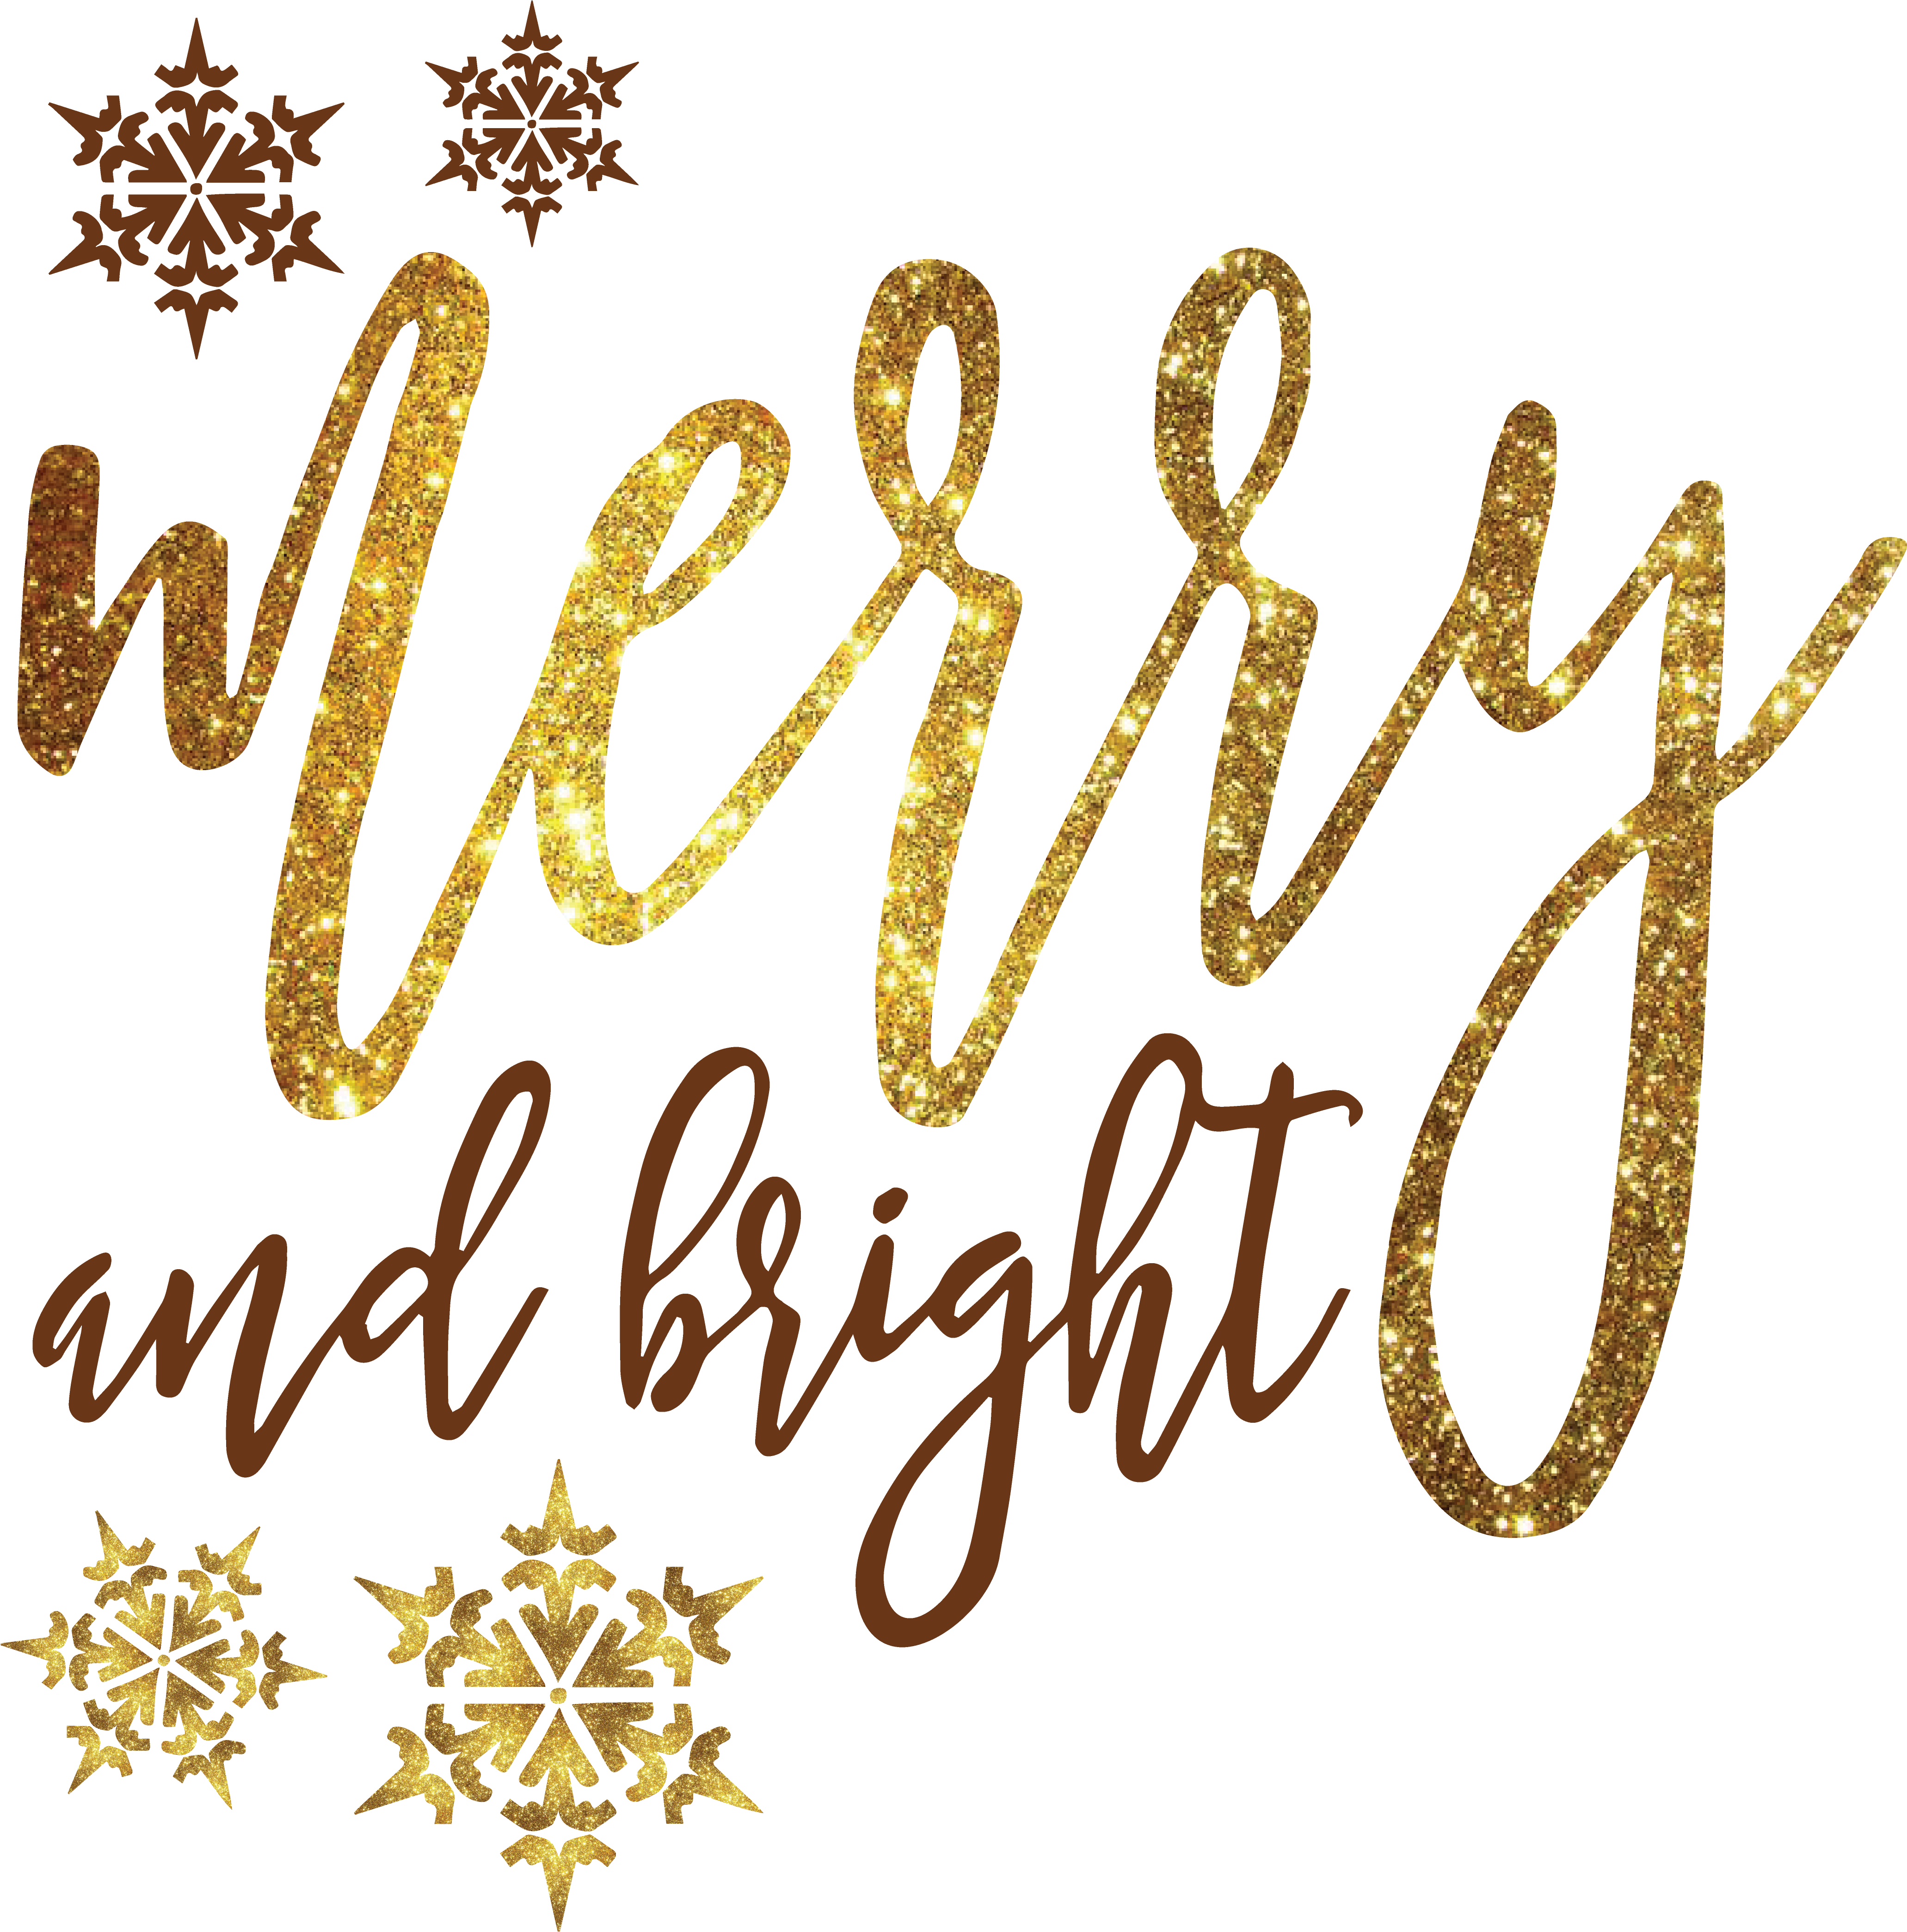 Download Wish You Happy Holidays Png PNG Image with No Background